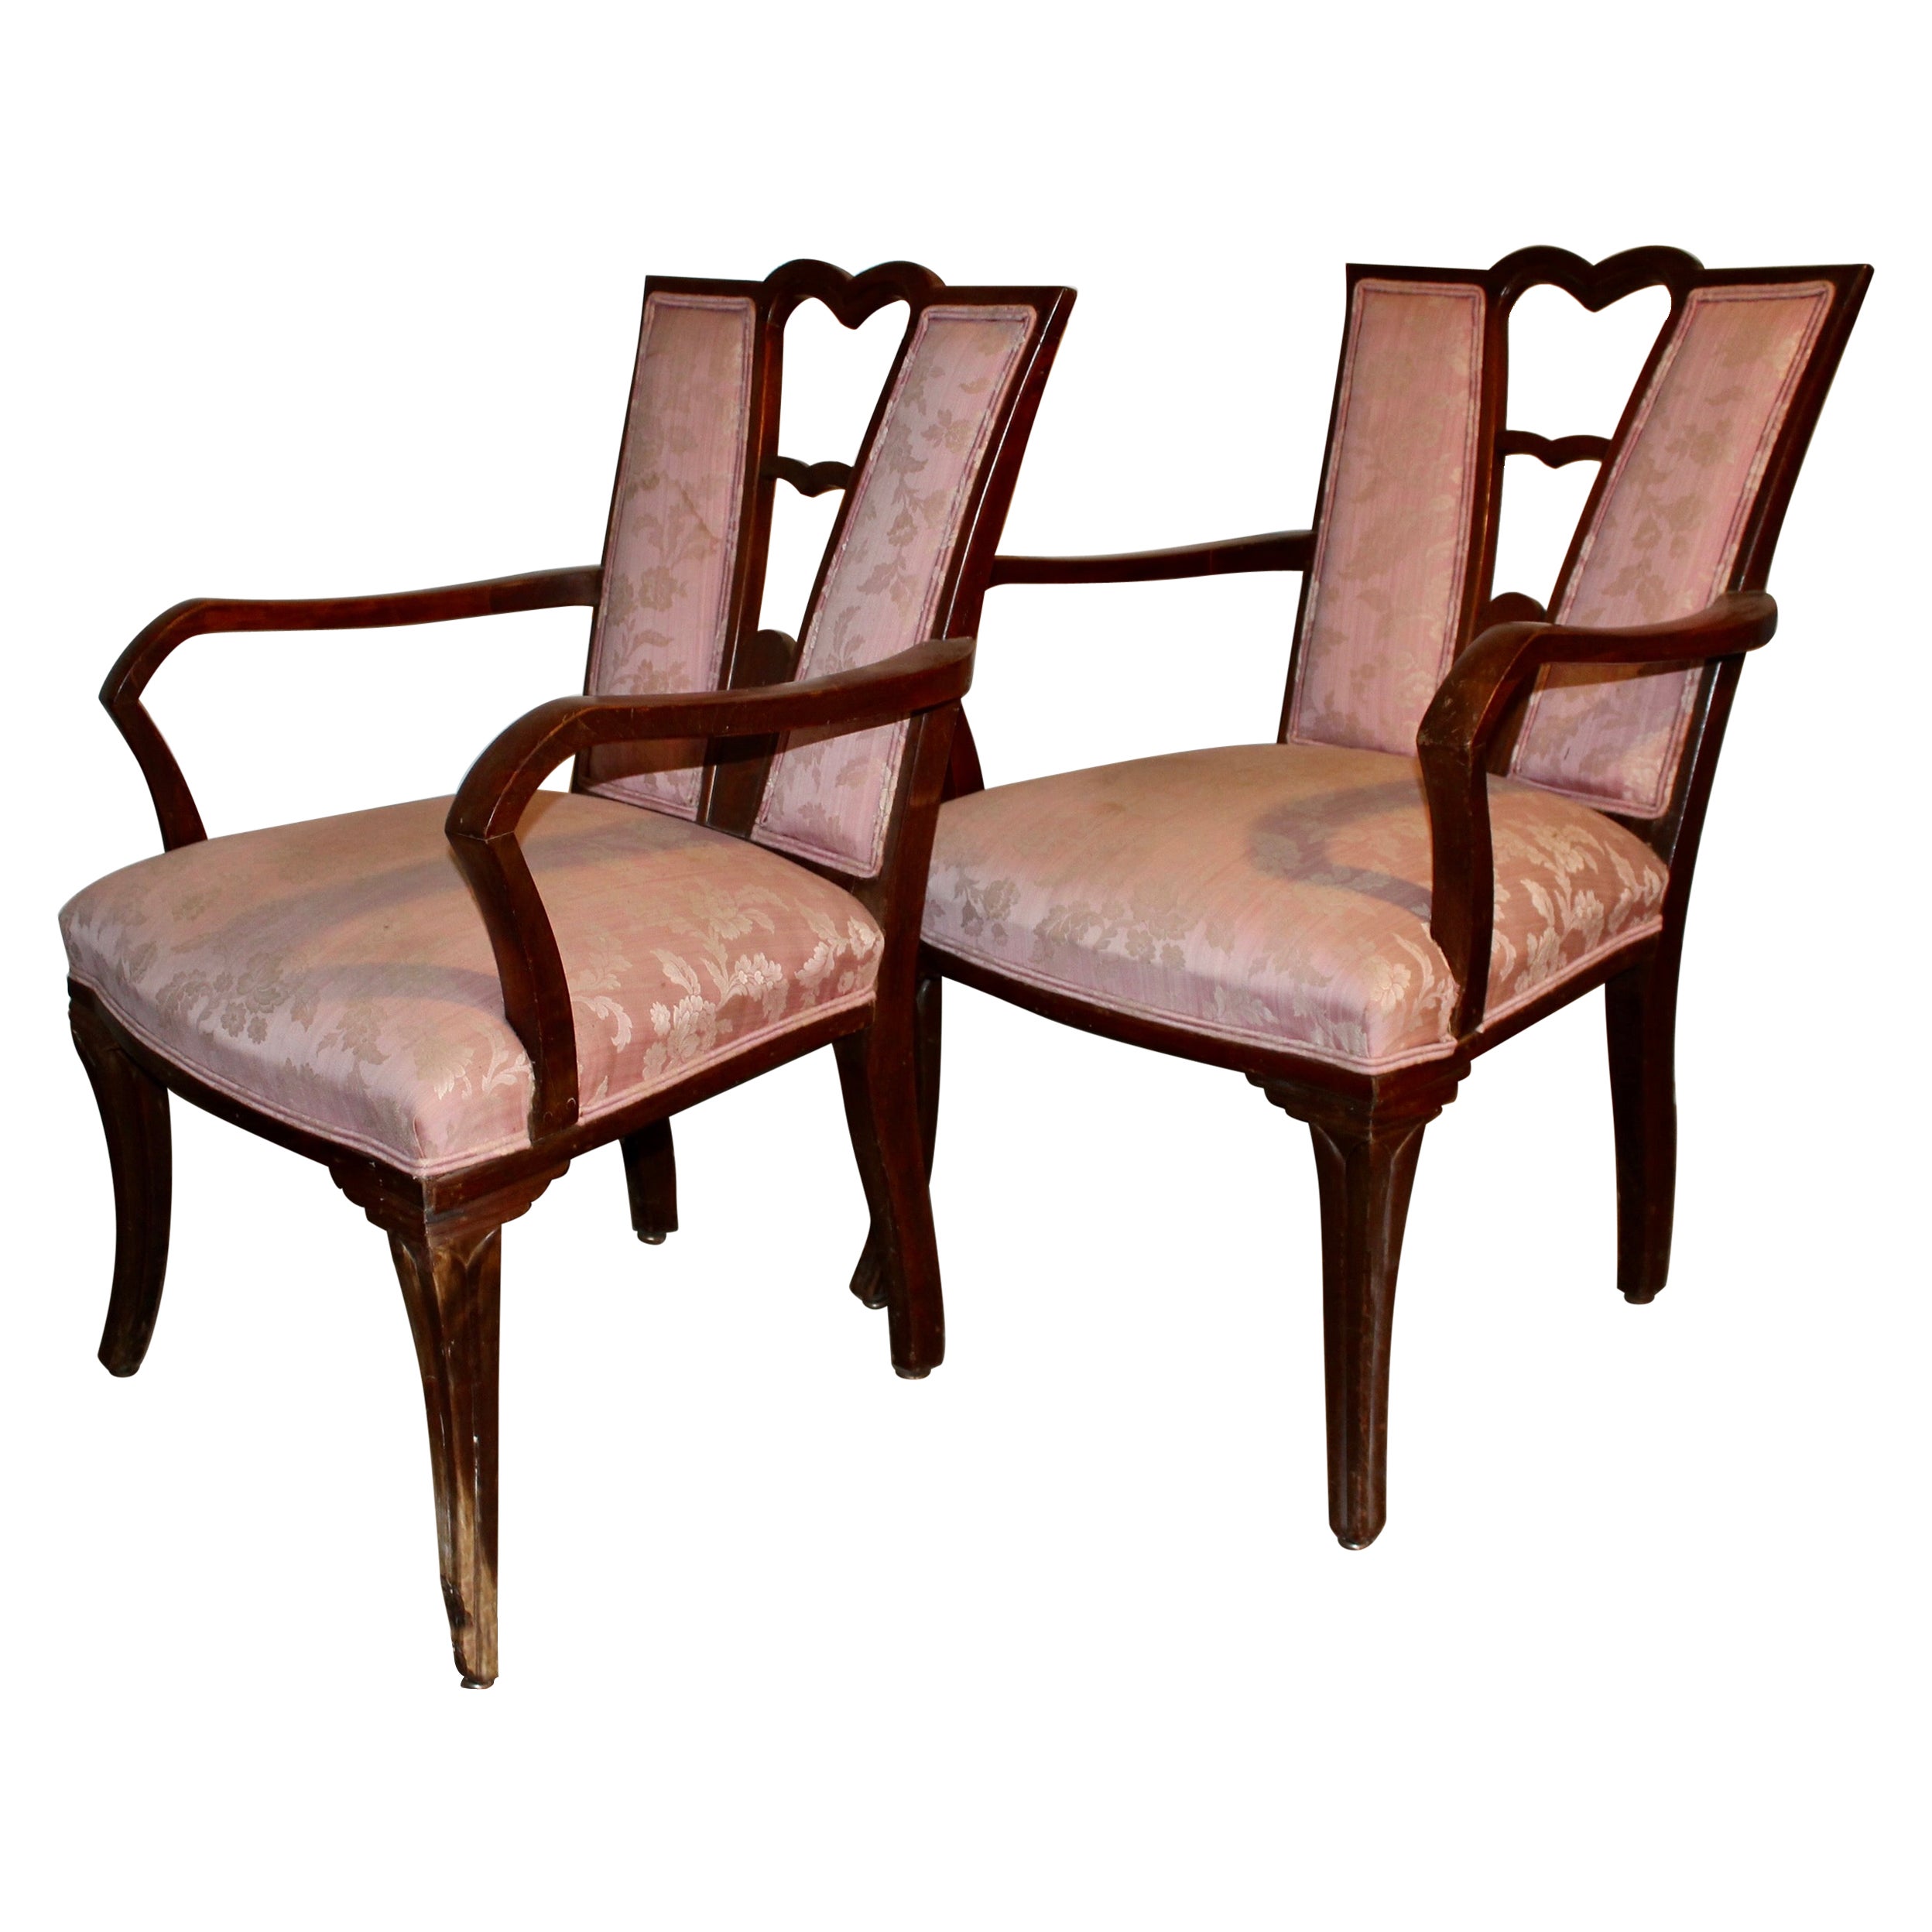 Eugene Schoen Pair Armchairs by Schmieg Hungate and Kotzian c.1929 For Sale